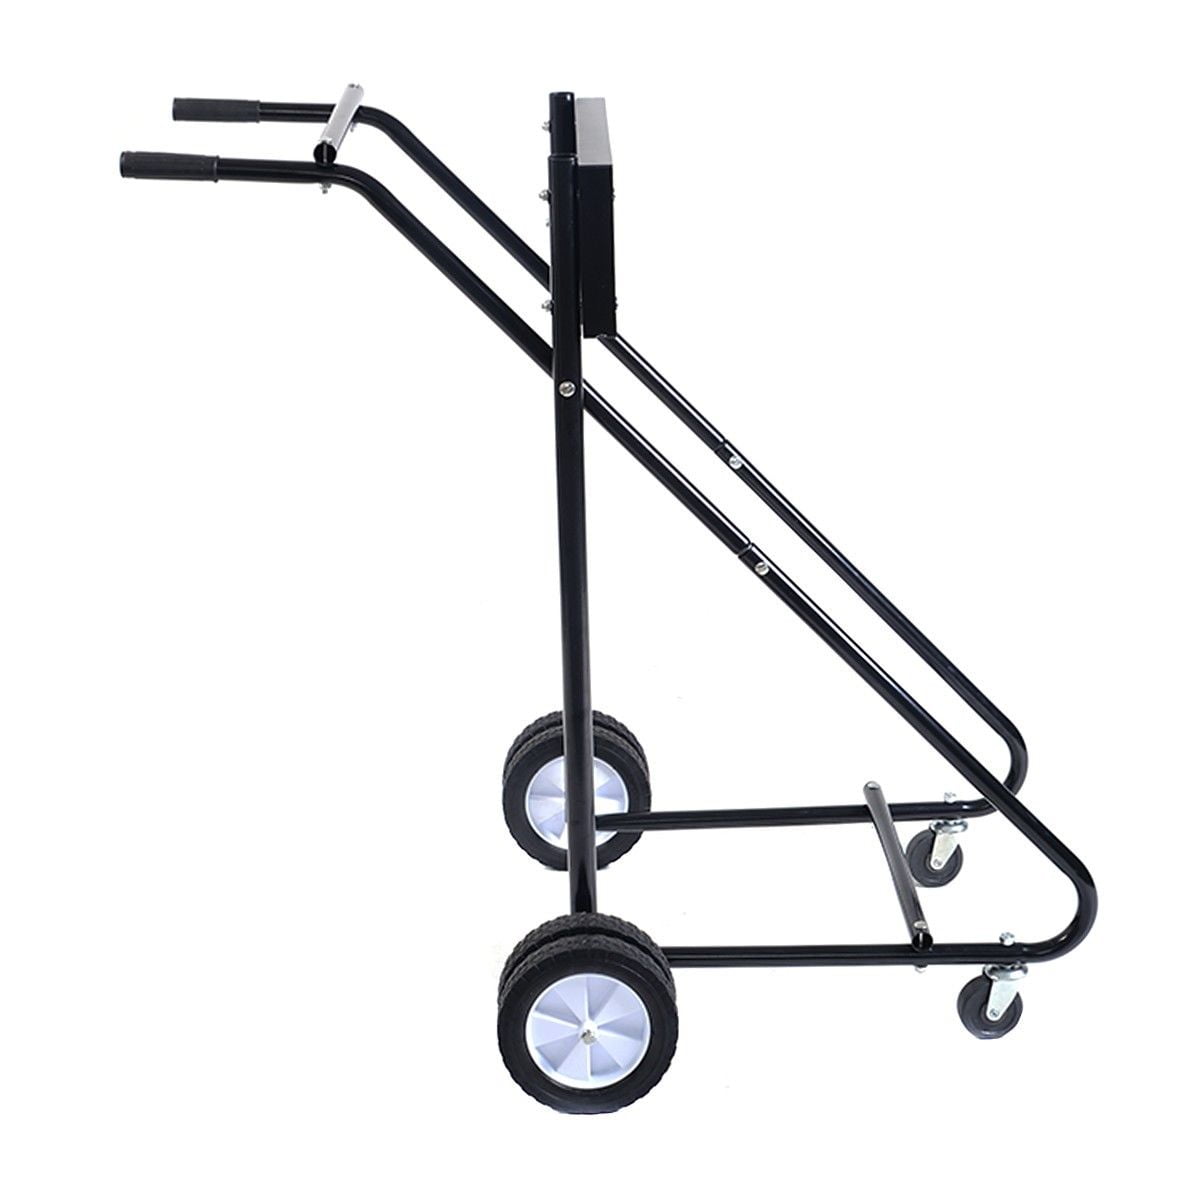 Details about   New 315bl Boat Outboard Motor Stand Cart Dolly With Wheel Enginee Carrier 